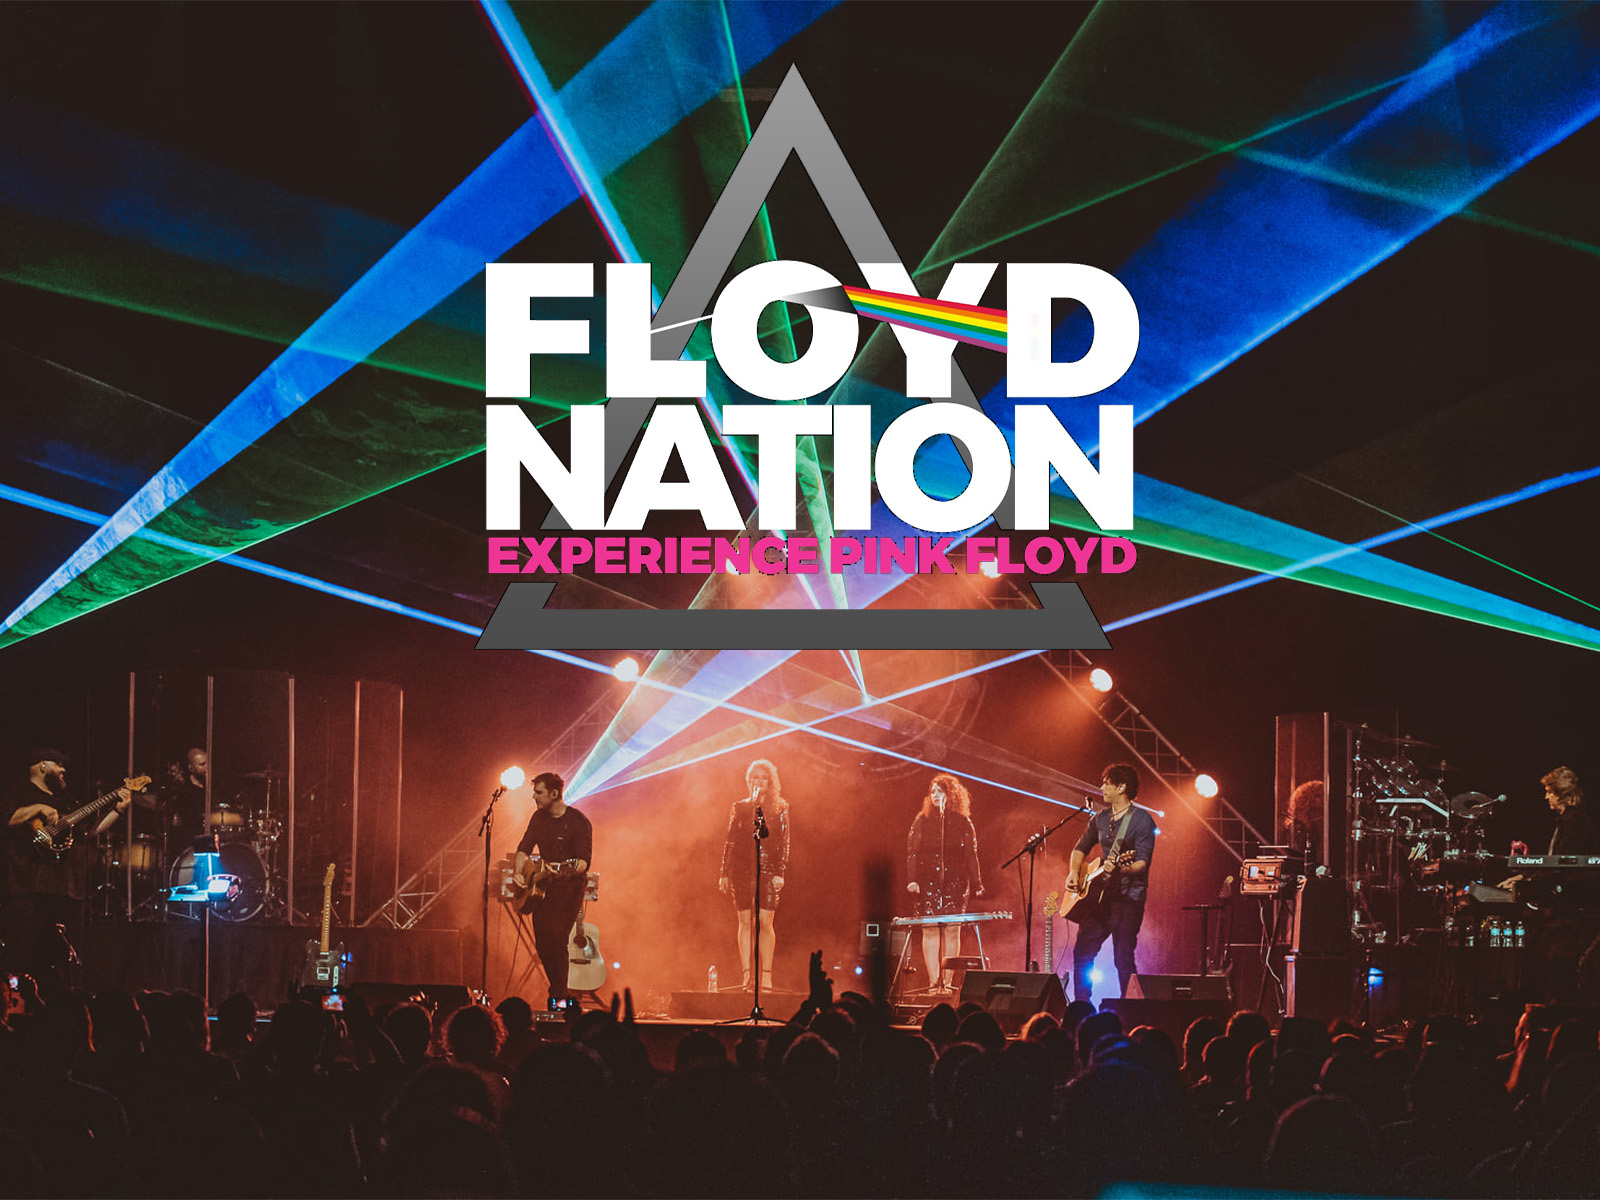 Floyd Nation: Experience Pink Floyd - Mayo Performing Arts Center